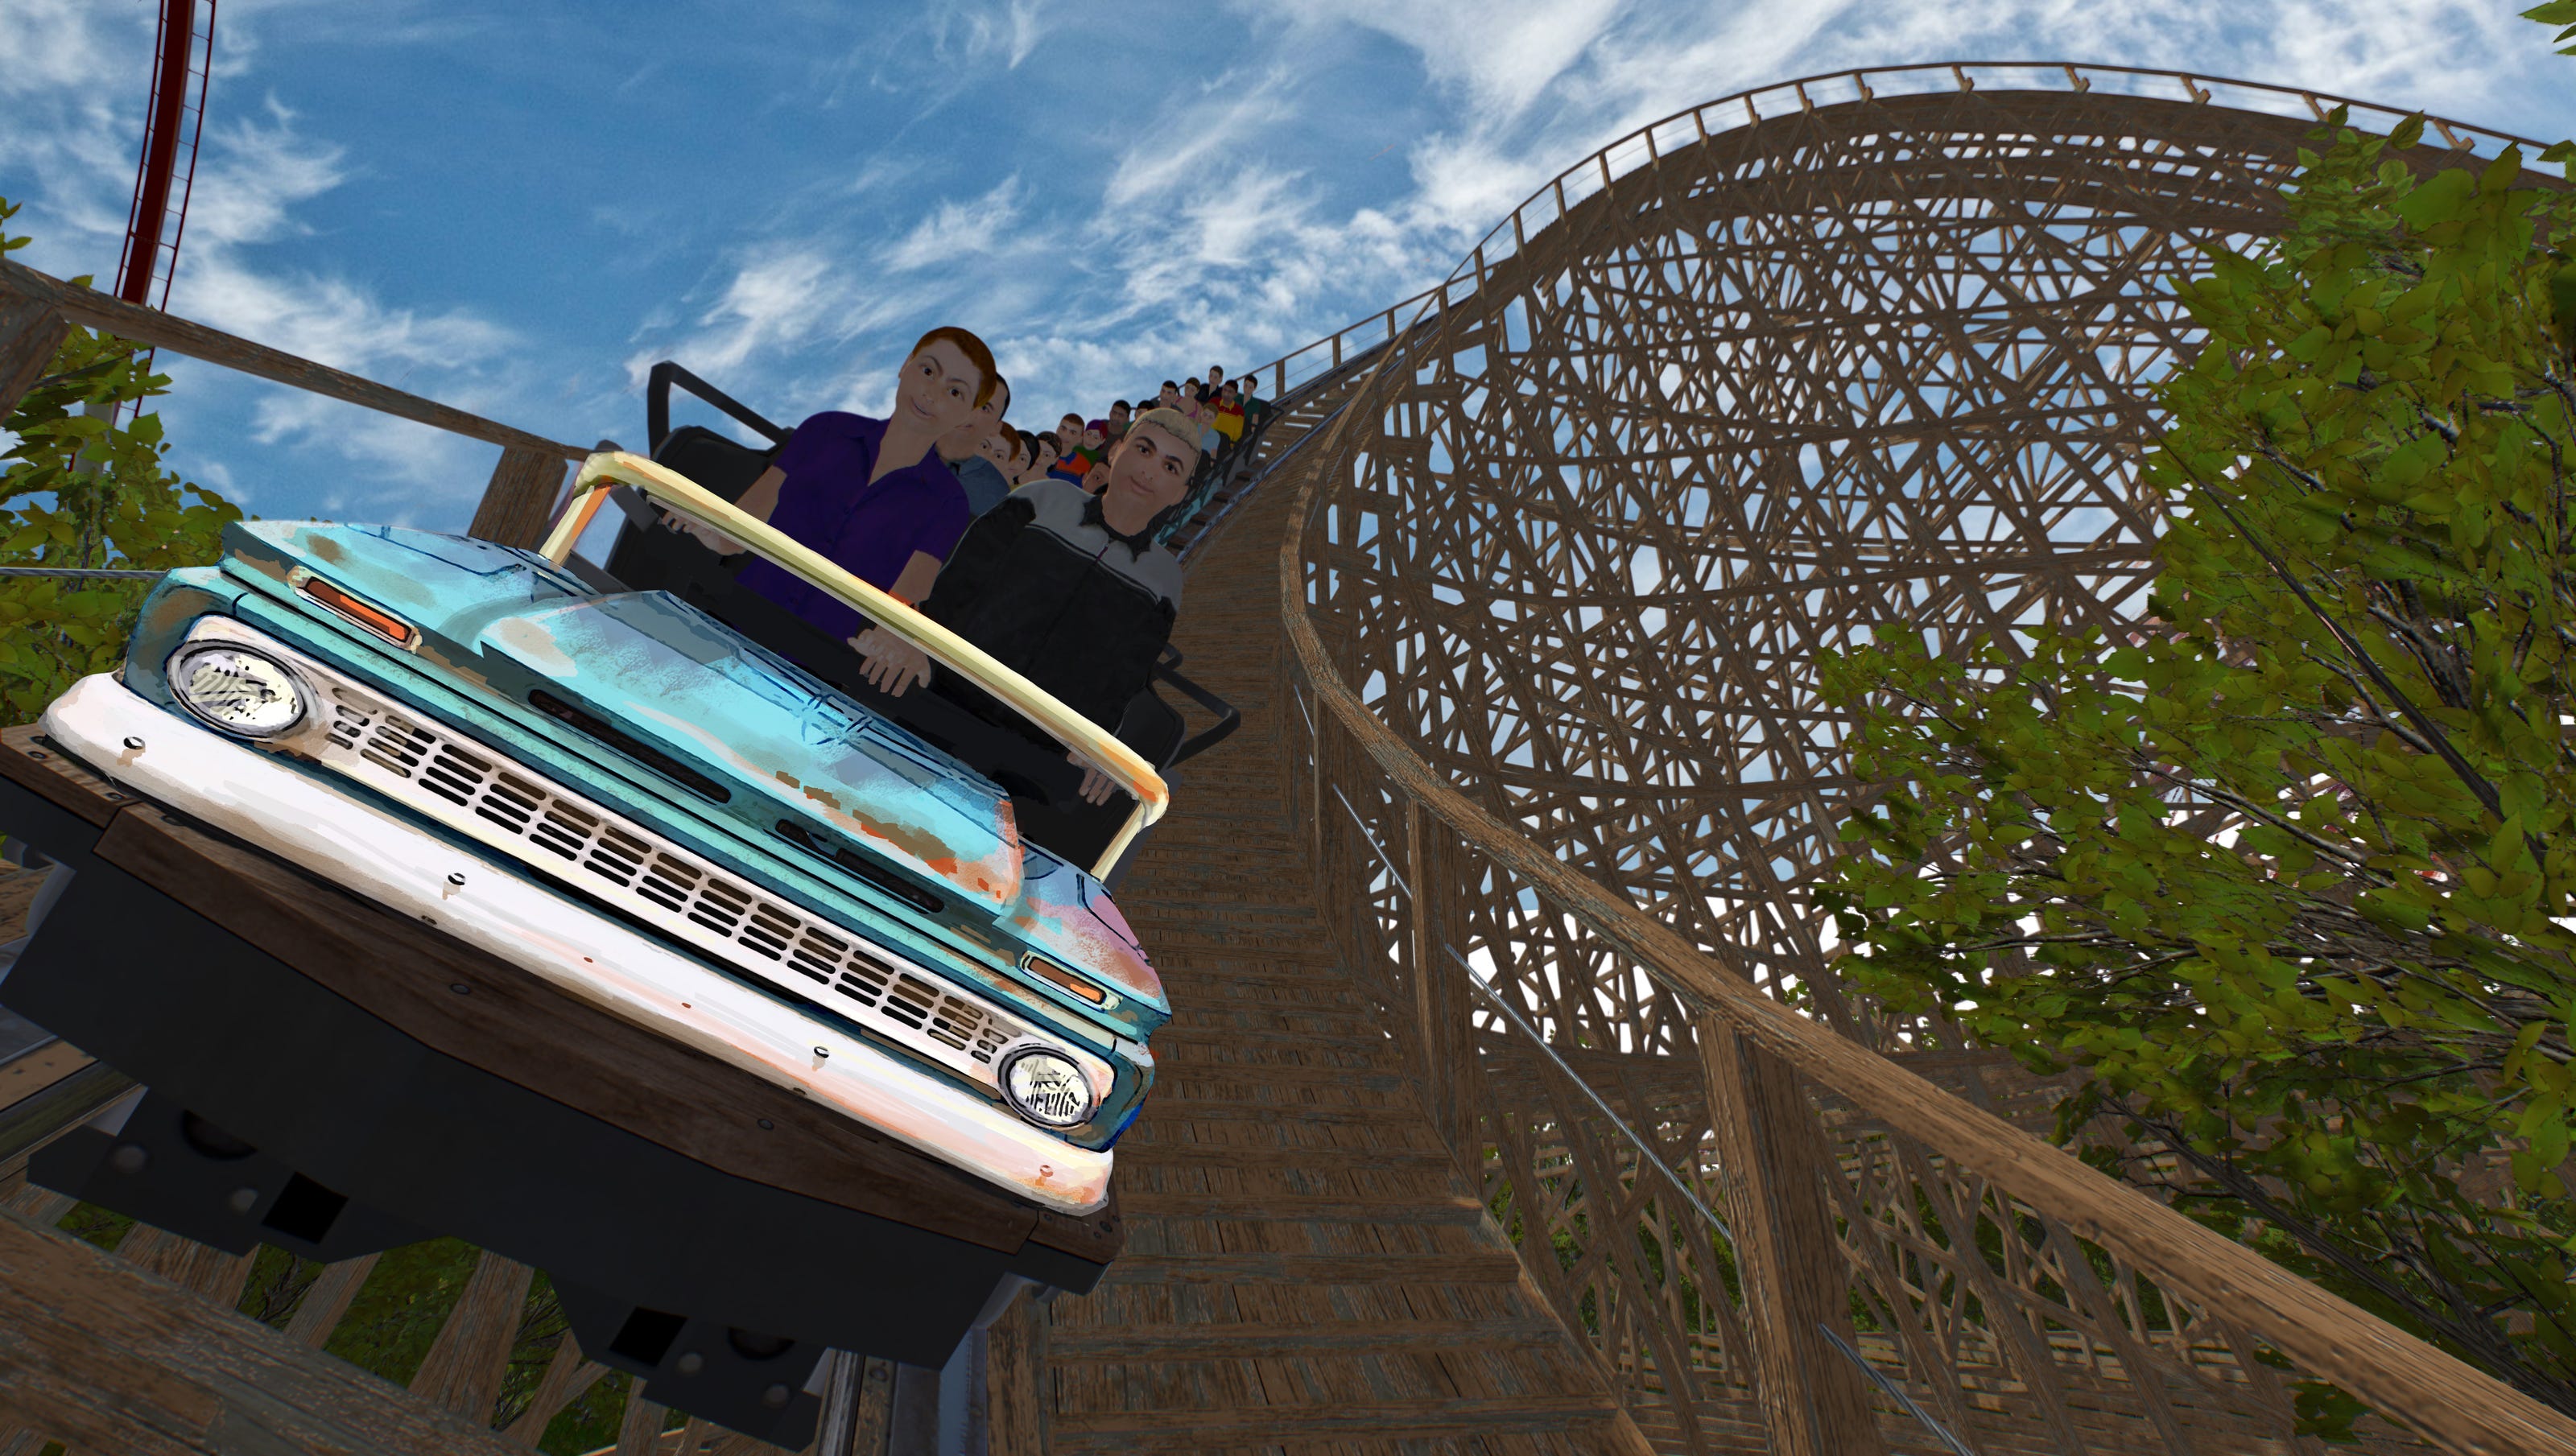 Kings Island reveals new roller coaster Mystic Timbers